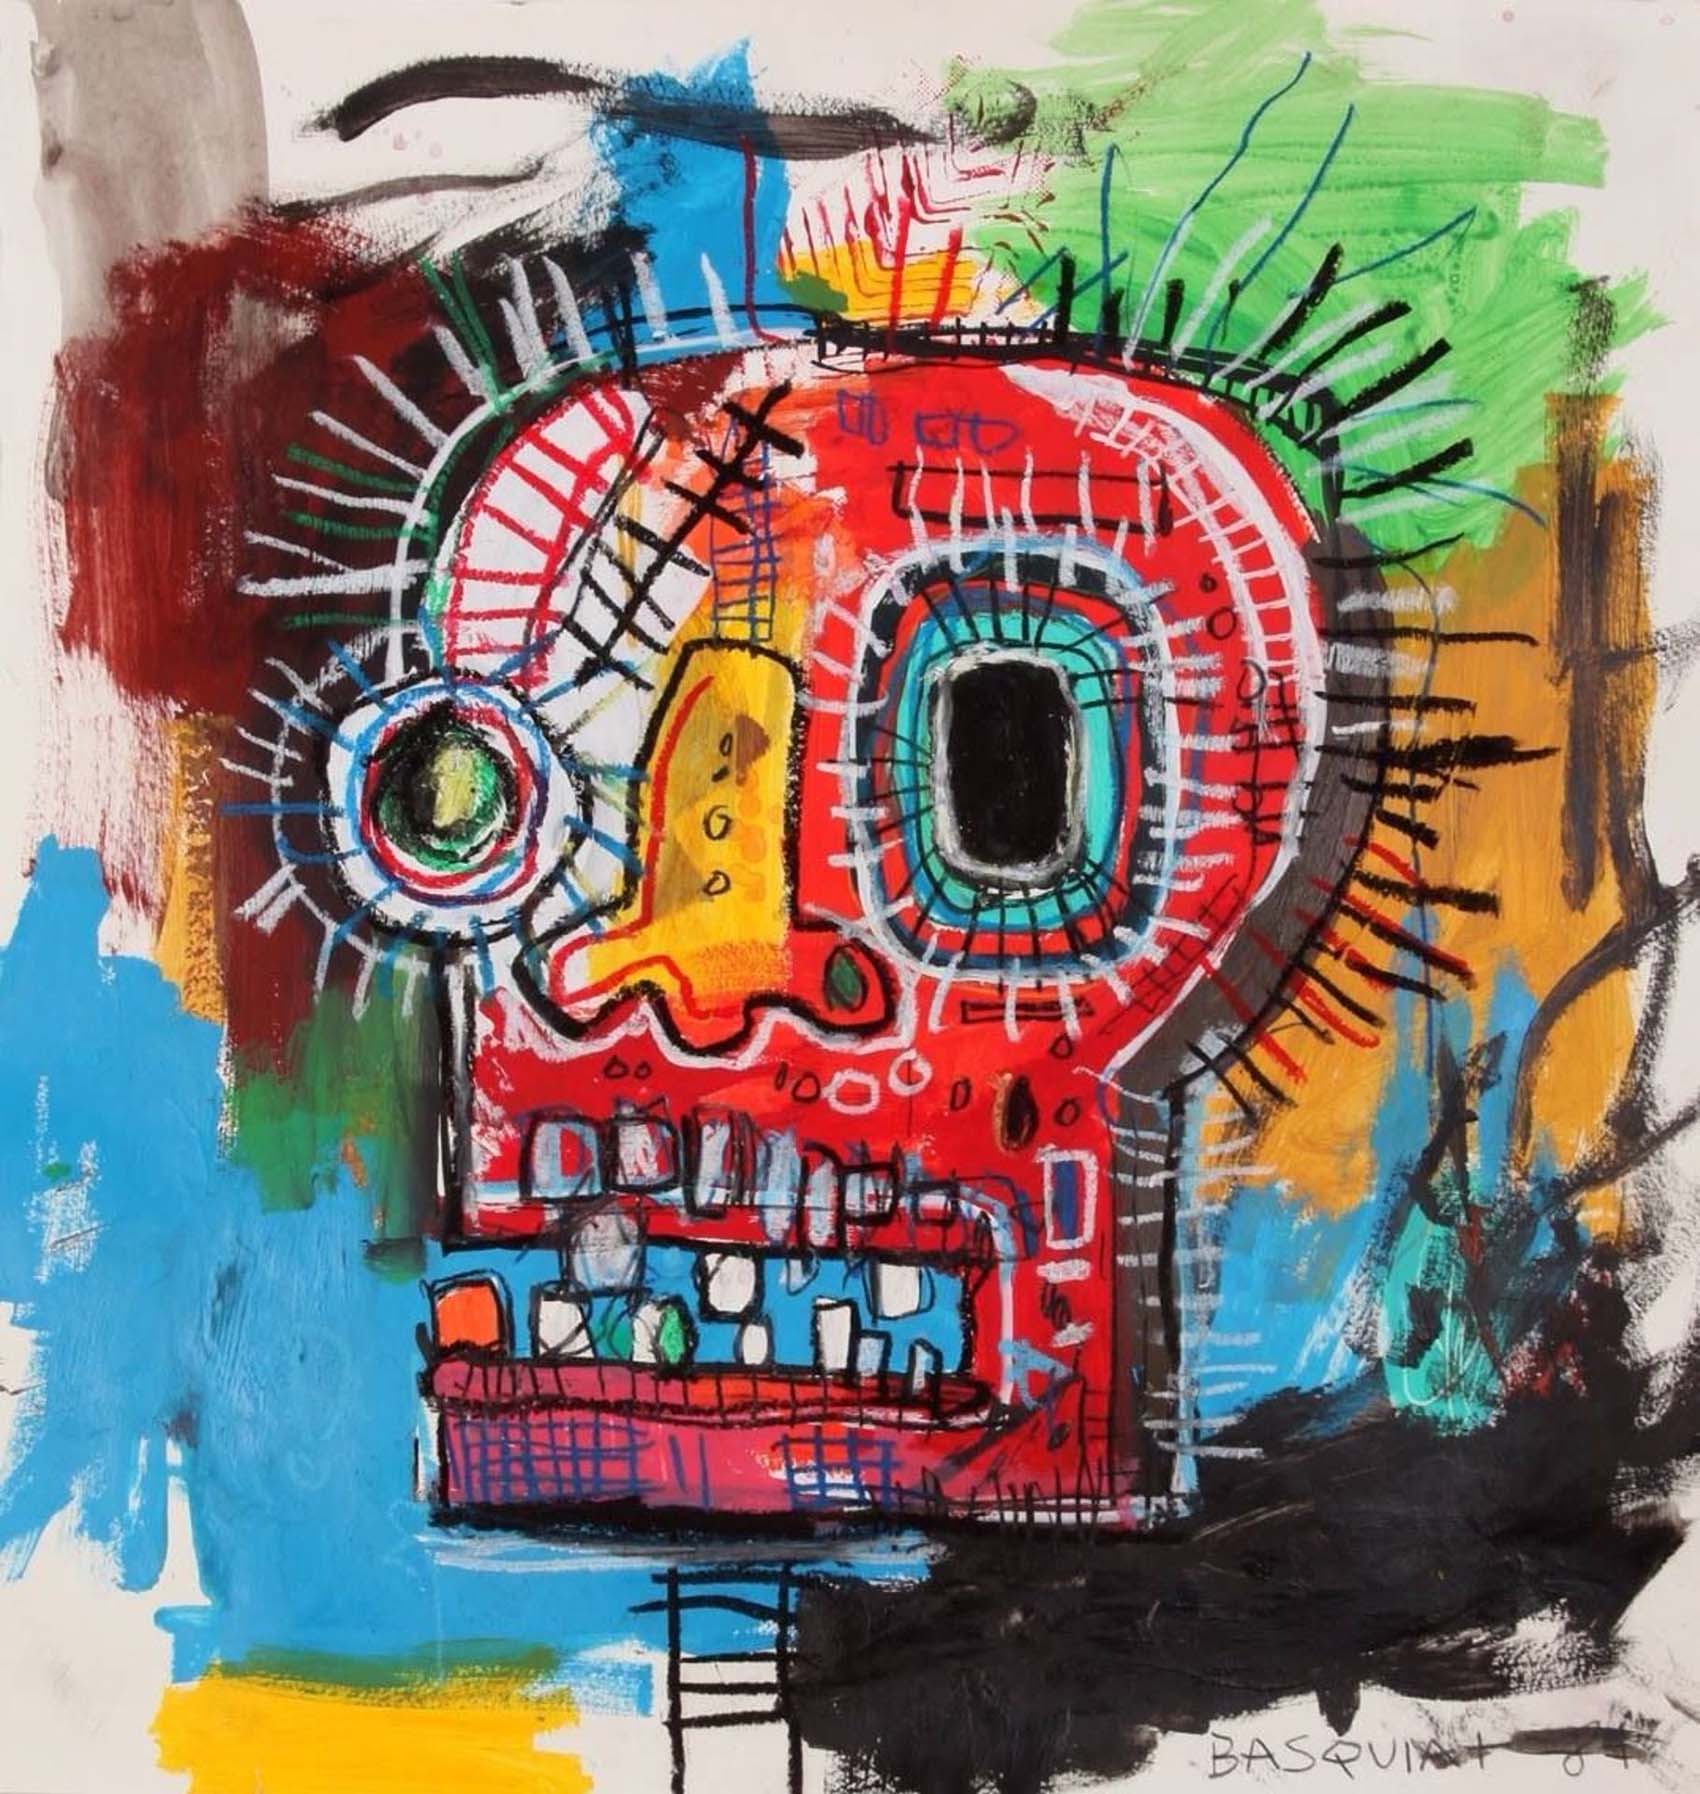 JeanMichel Basquiat Biography, Artworks, Famous Paintings and Facts